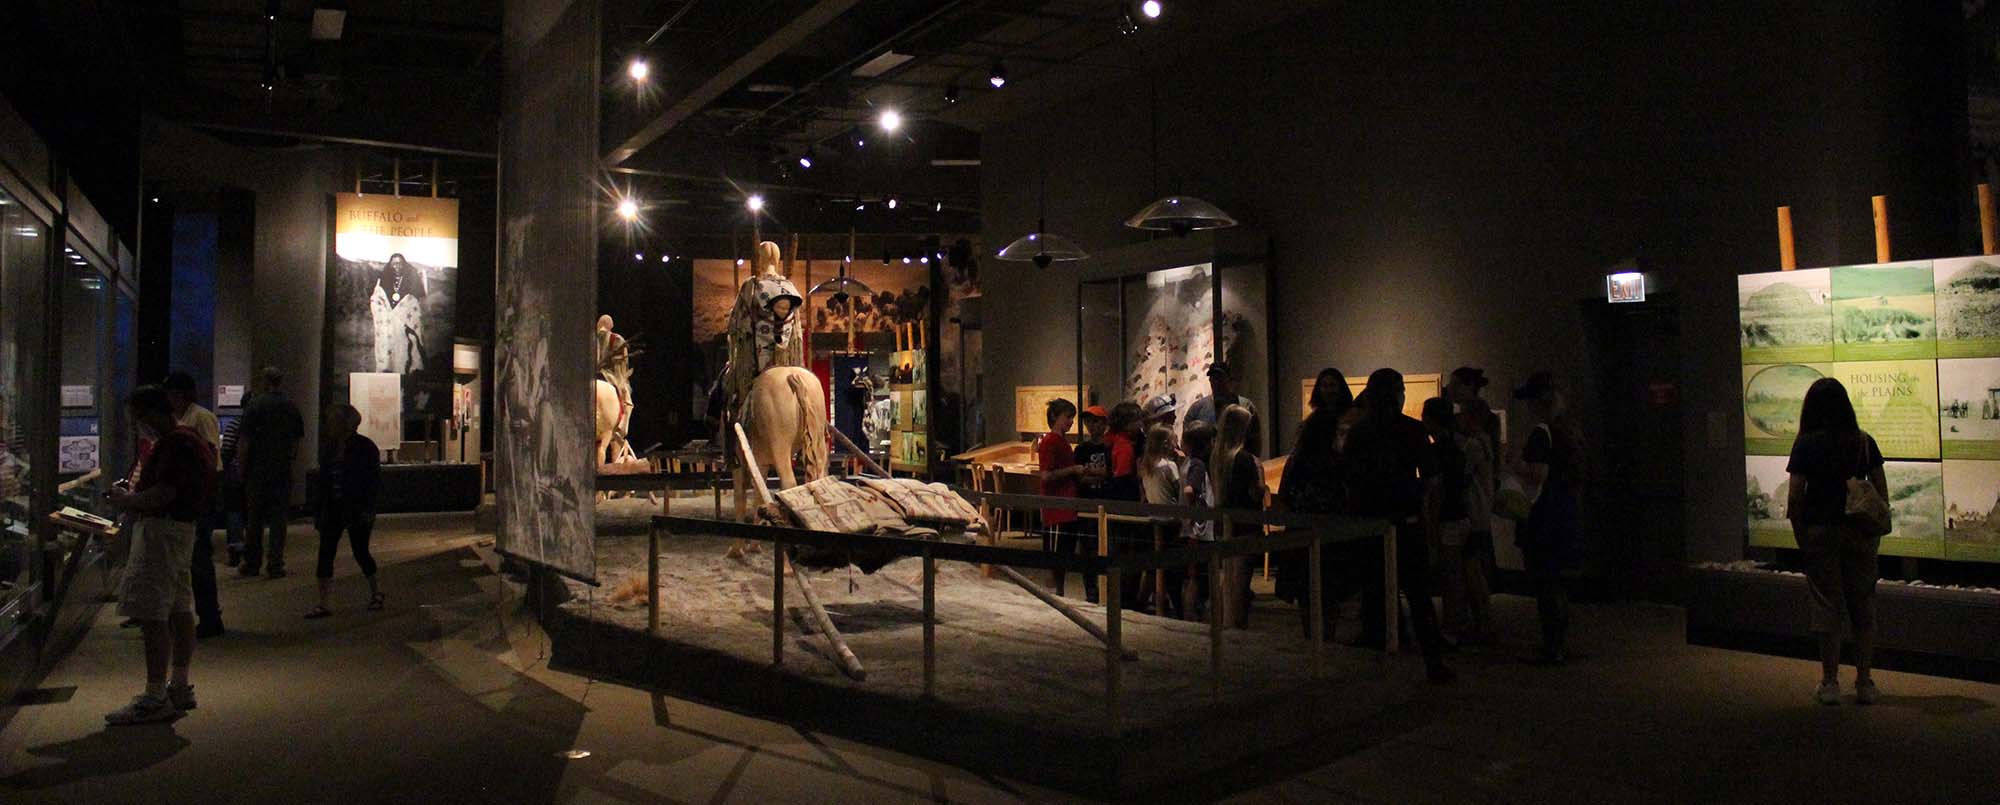 A MILES school group in the Plains Indian Museum.